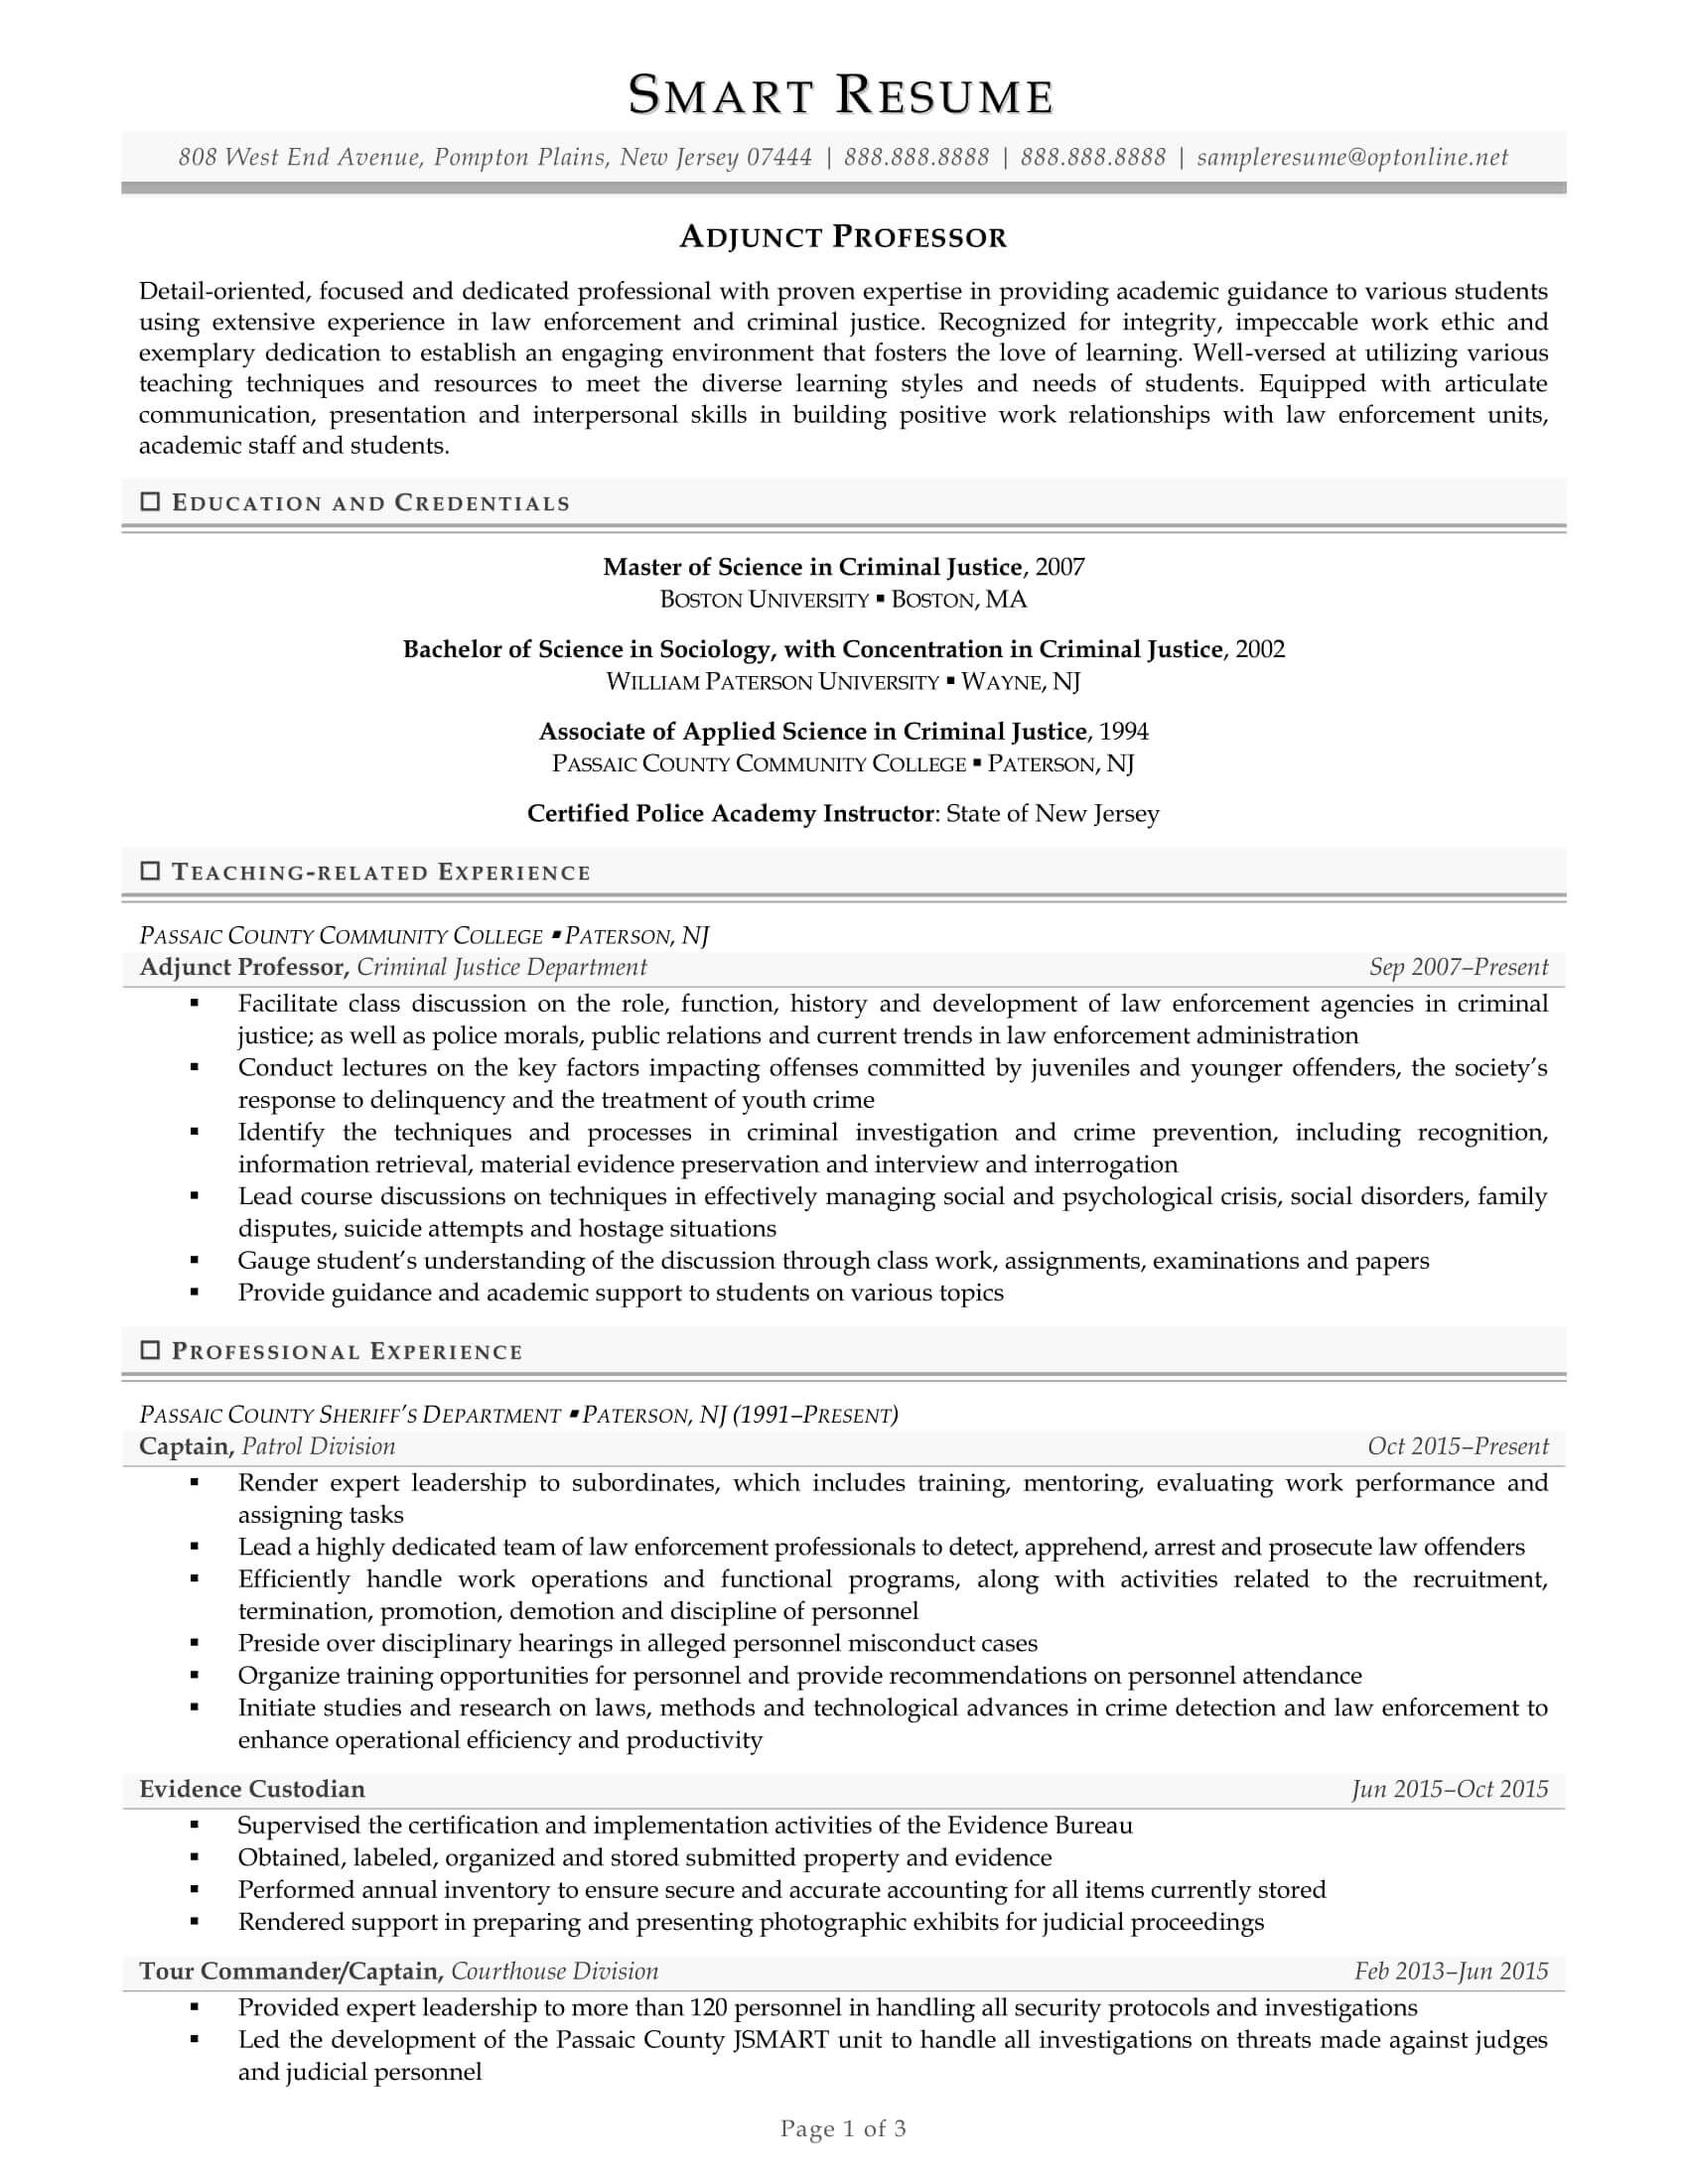 Sample Of A Faculty Adjunct Resume Resume Examples Smart Resume Services